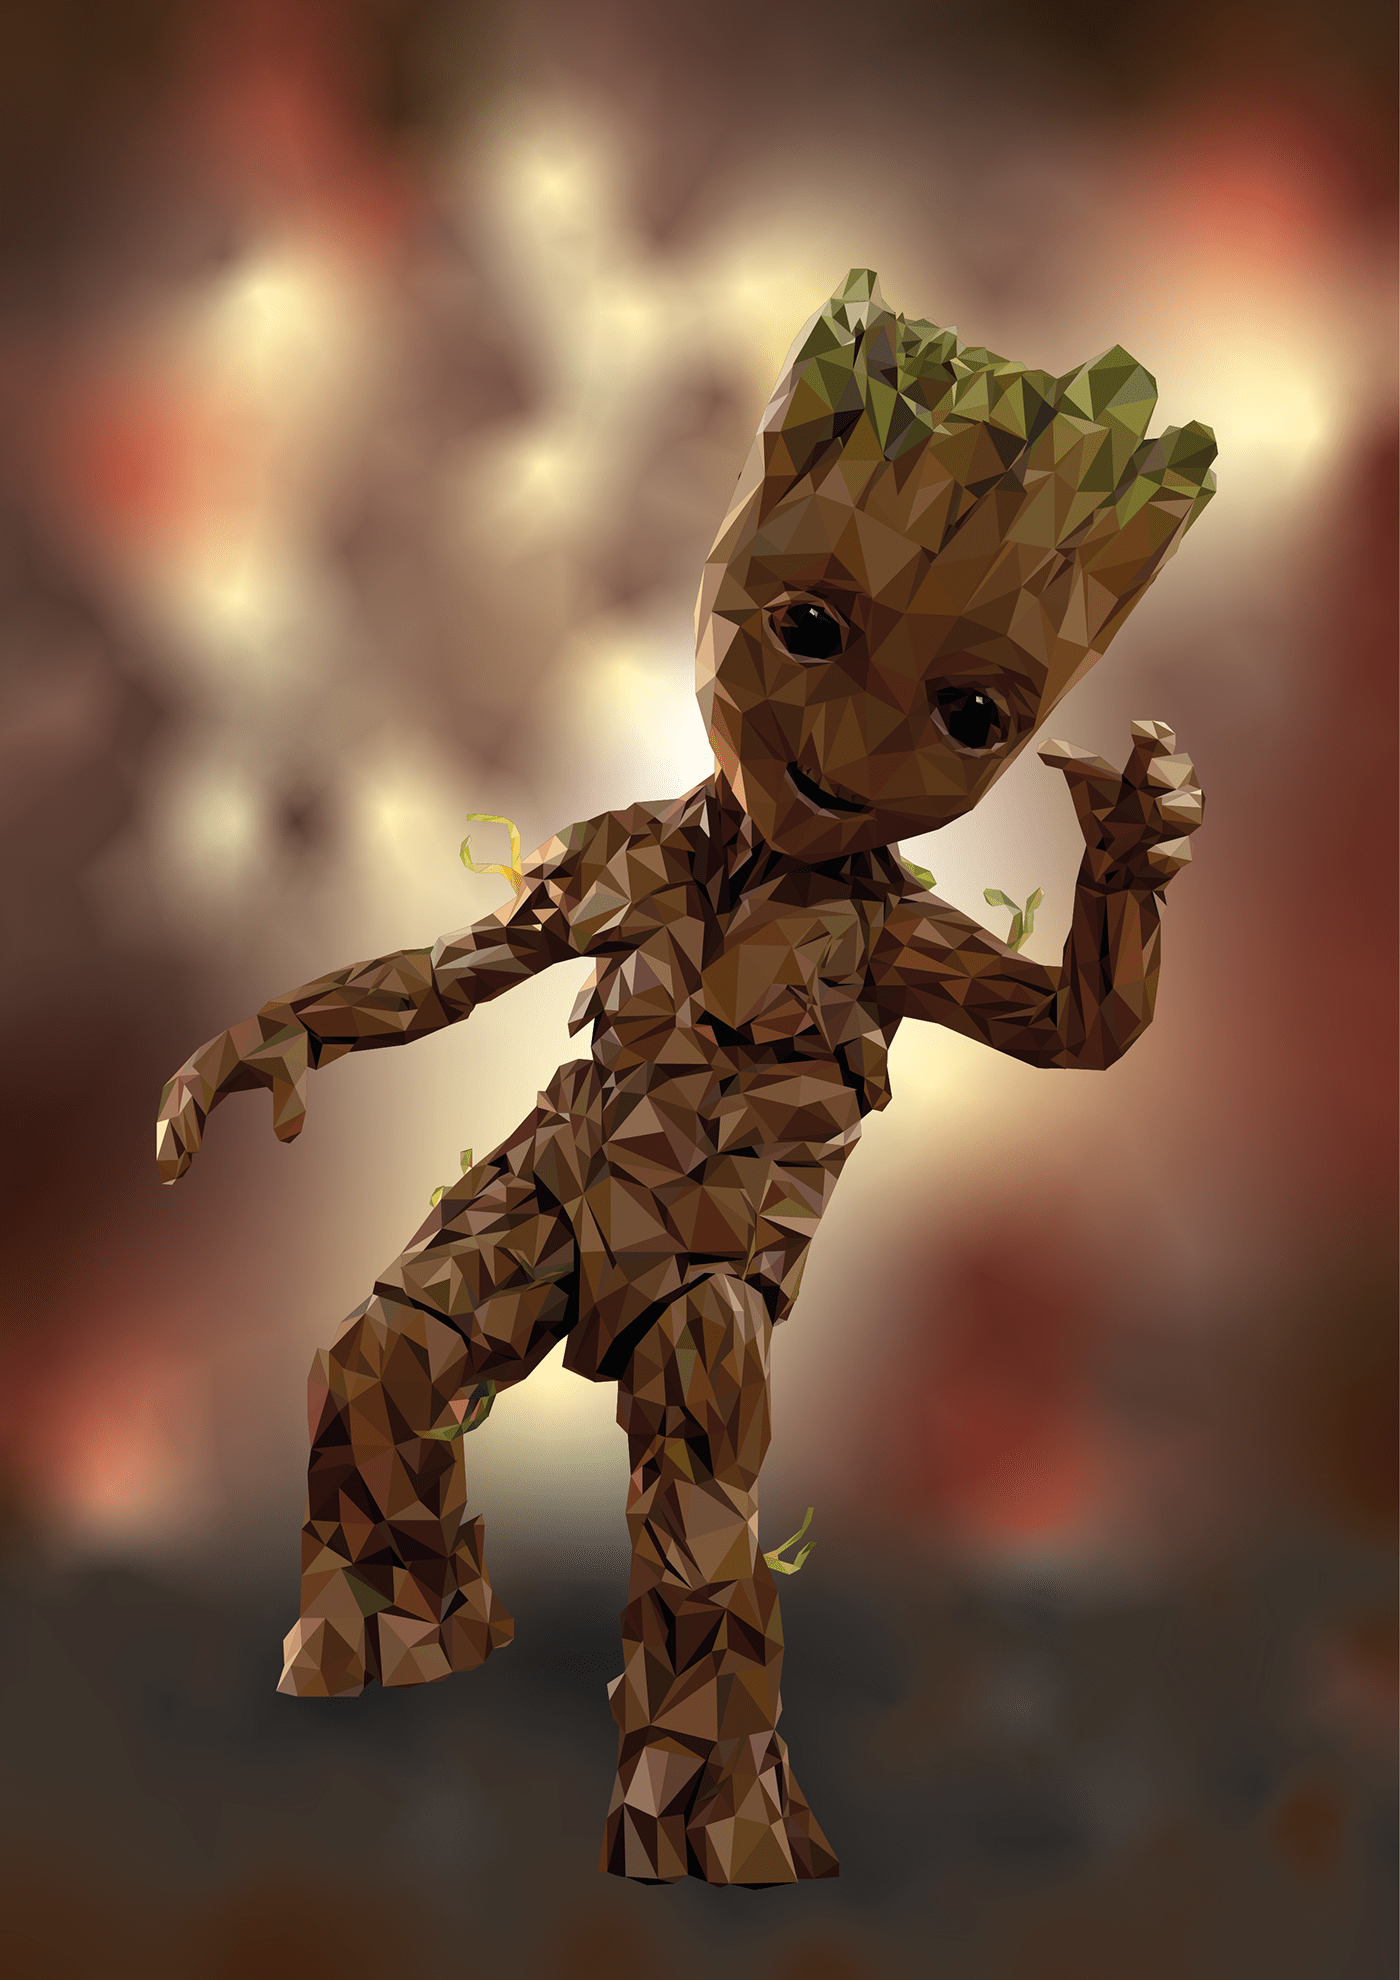 adobe illustrator art groot guardians of the galaxy Low Poly MARVEL UNIVERSE vector